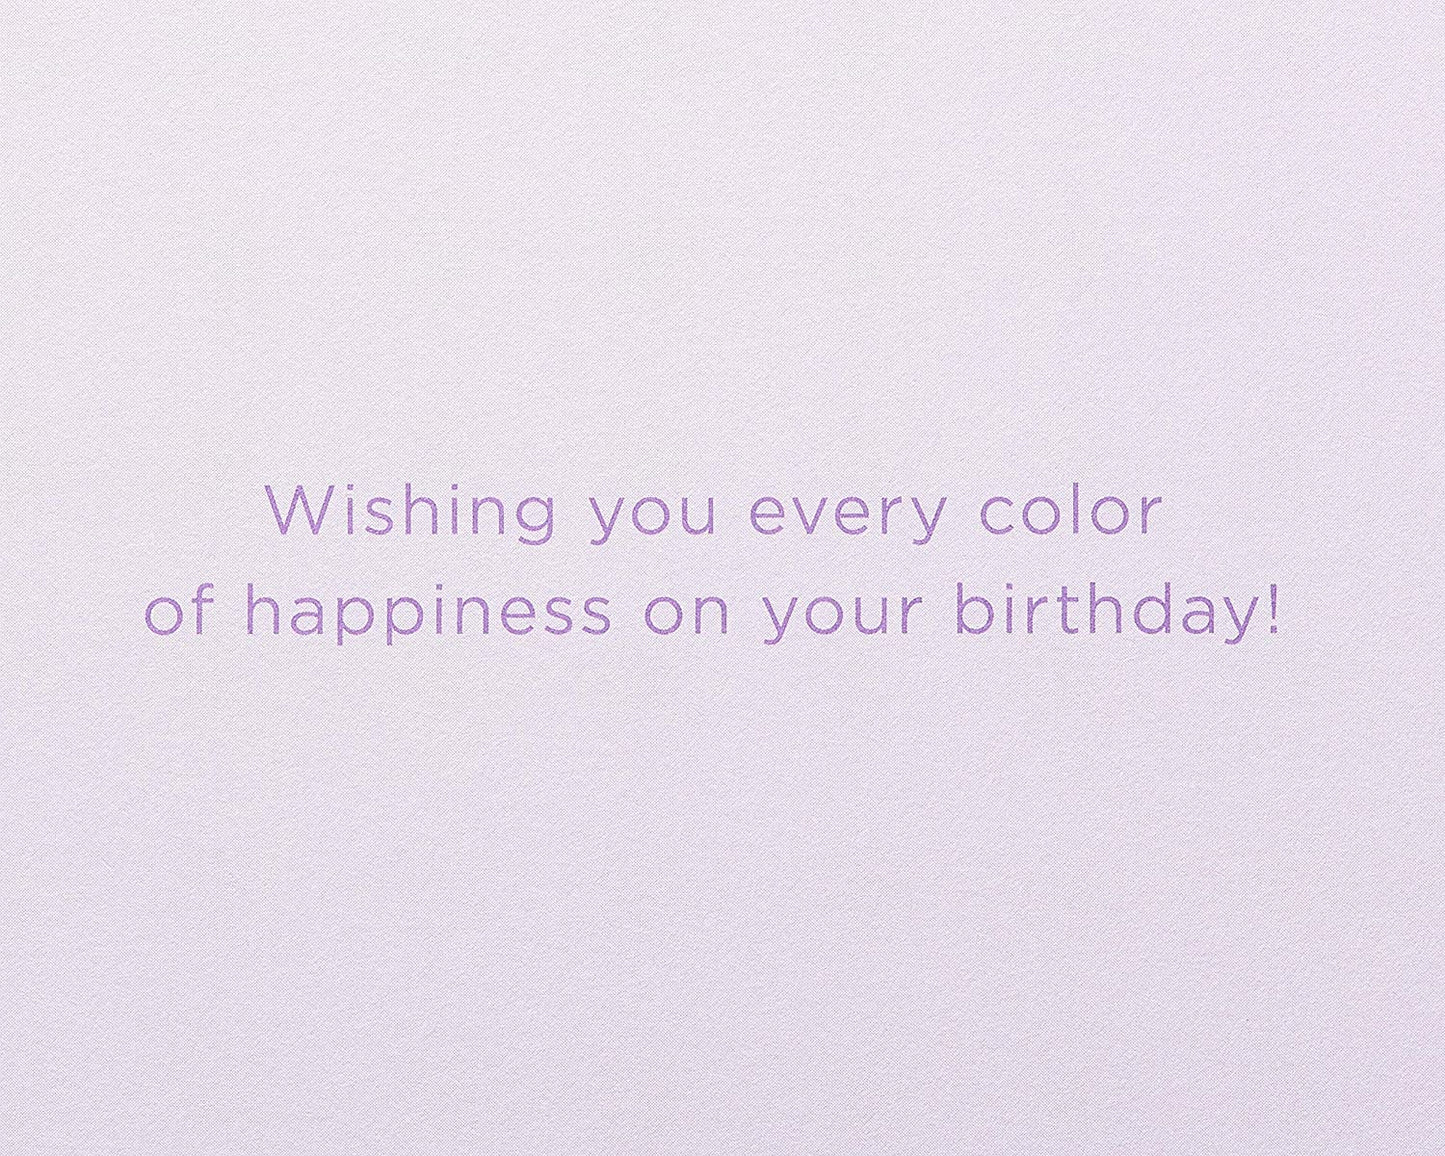 Papyrus Birthday Card - Designed by Judith Leiber (Every Color of Happiness)